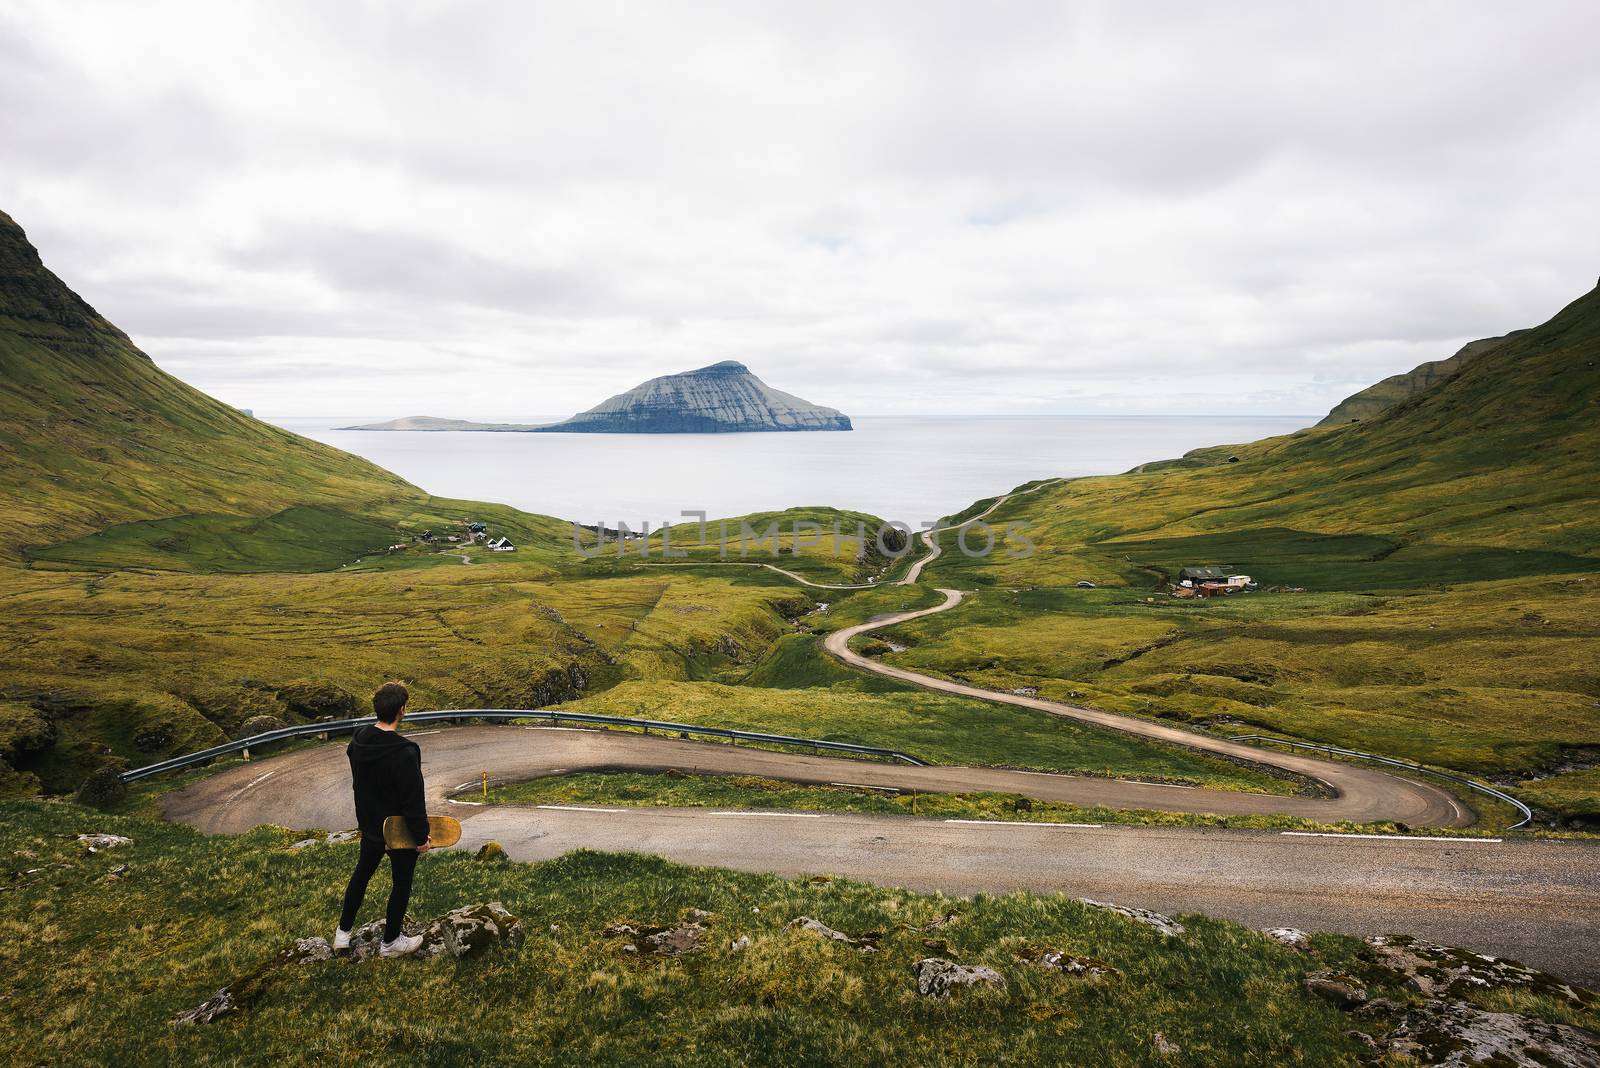 Young skater with his skateboard looks at a winding road on Faroe Islands by nickfox